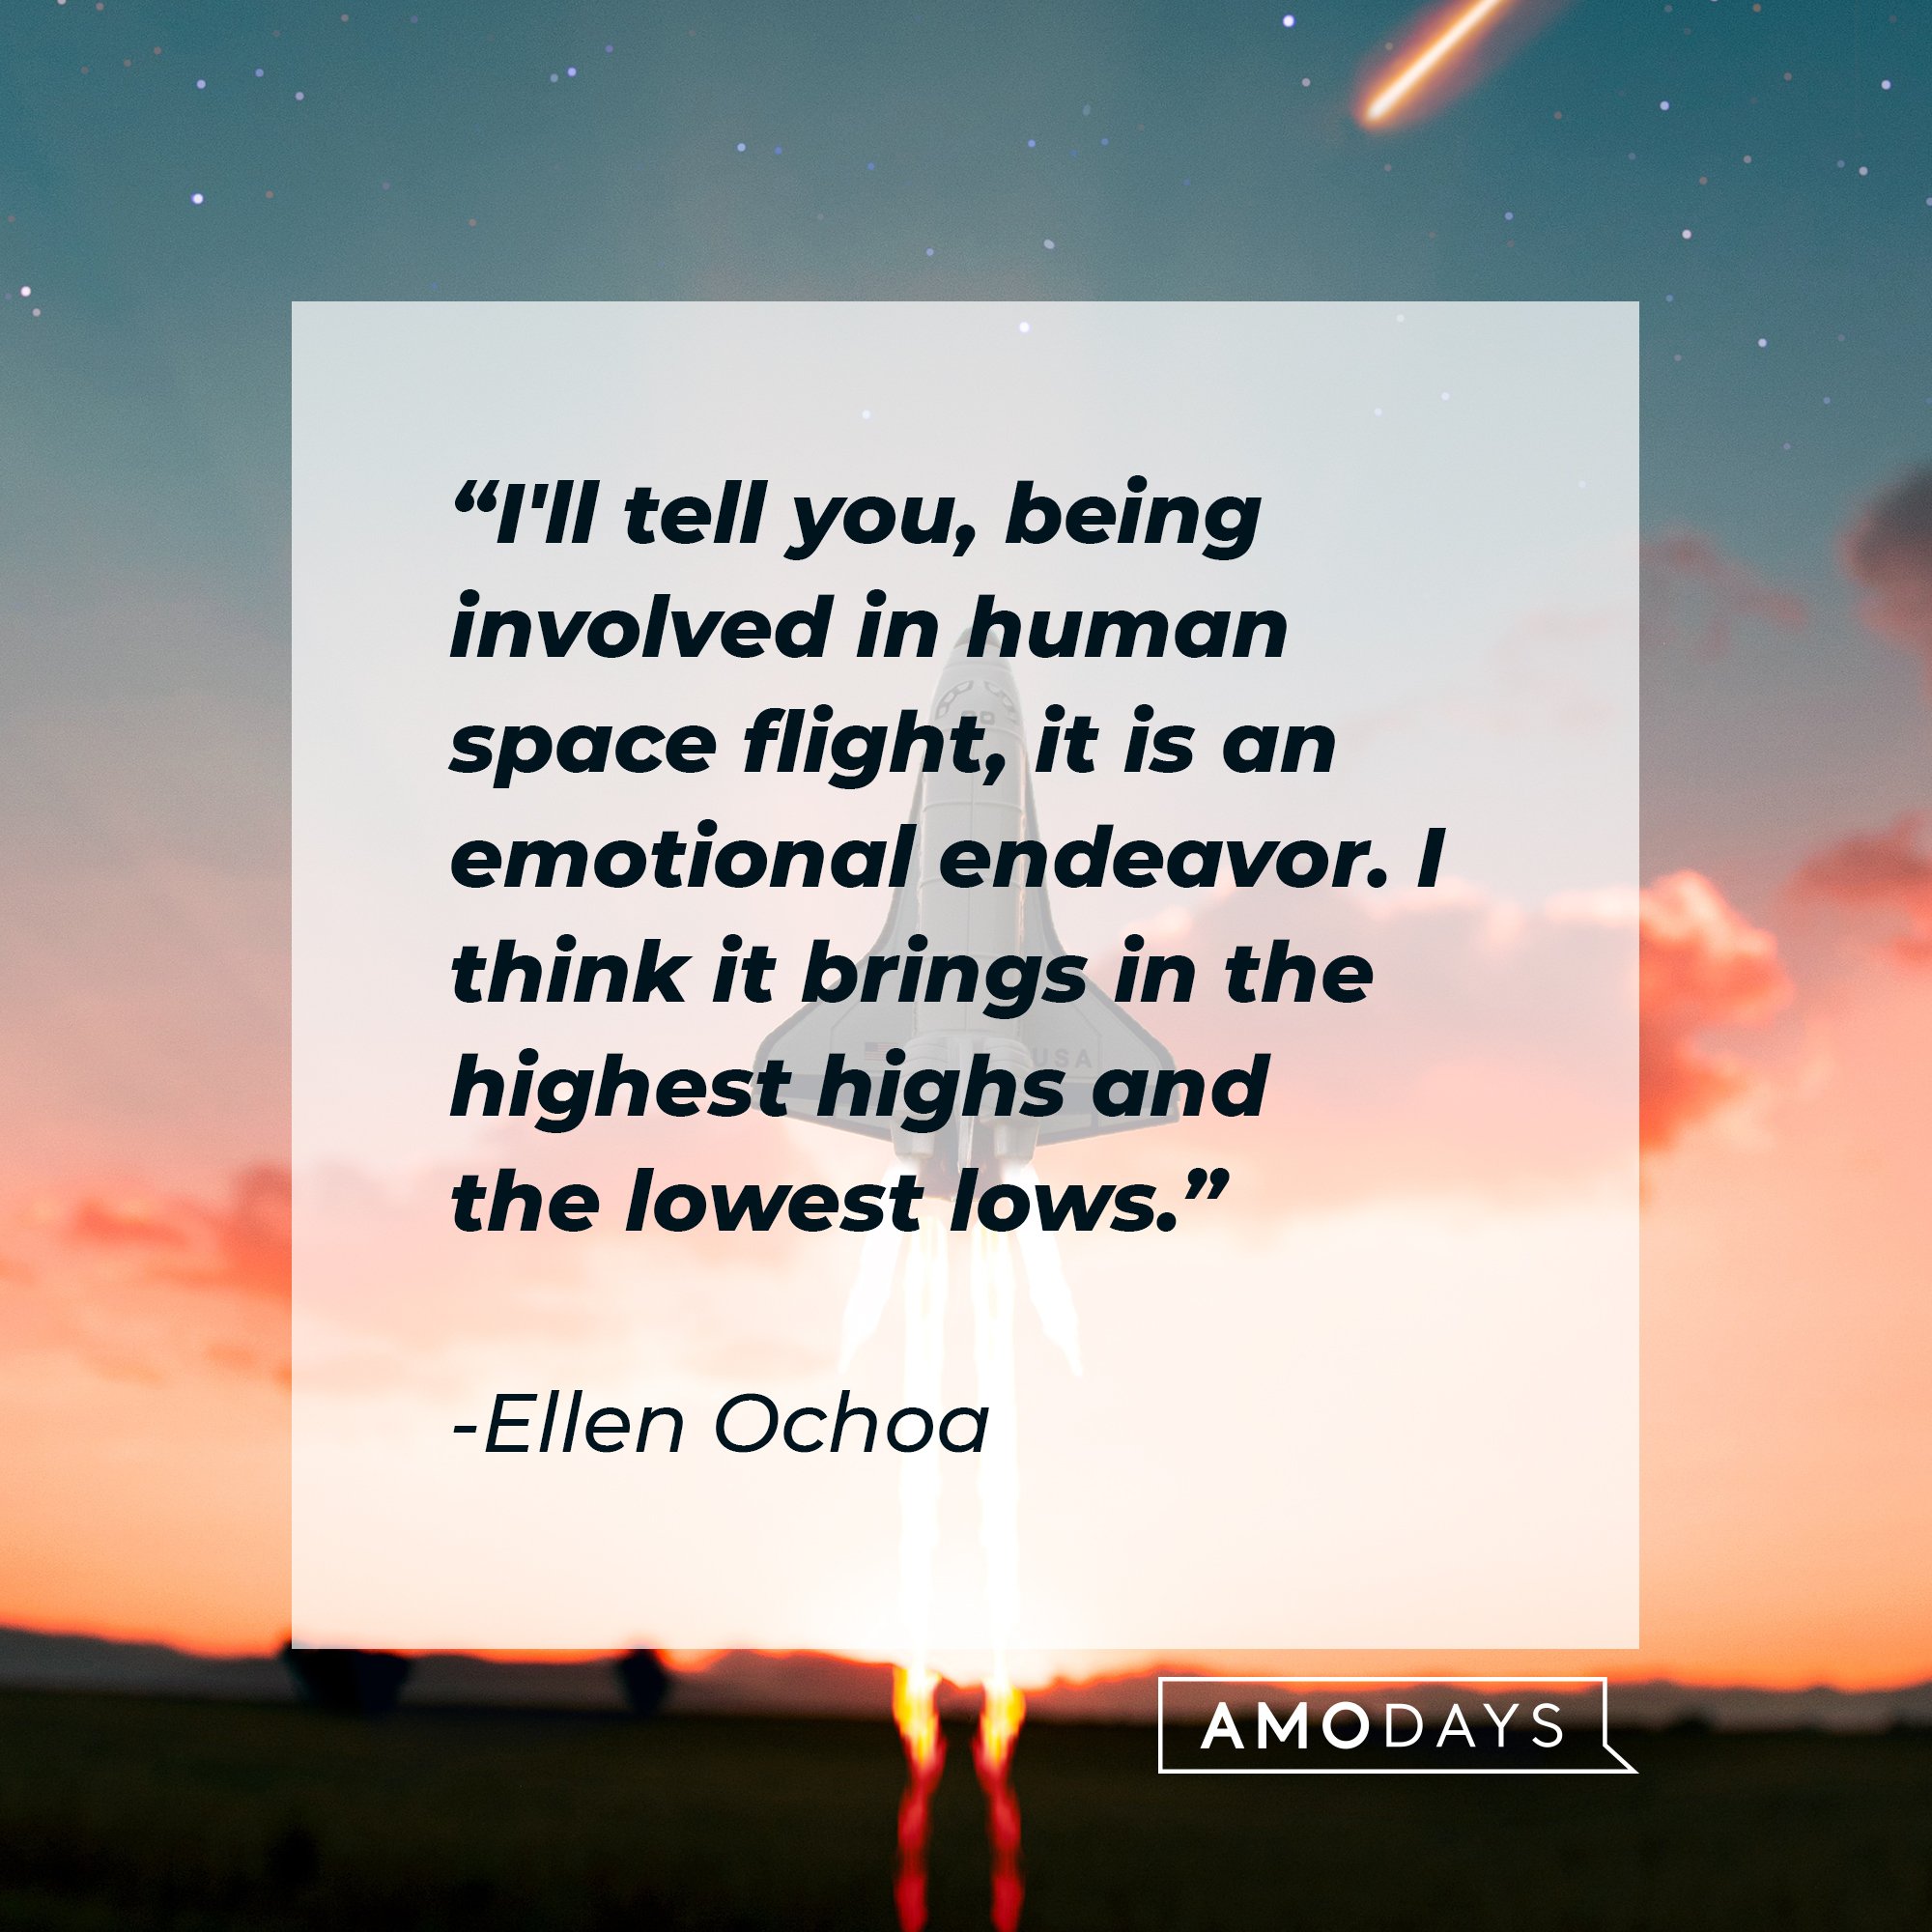  Ellen Ochoa's quote: "I'll tell you, being involved in human space flight, it is an emotional endeavor. I think it brings in the highest highs and the lowest lows."  | Image: AmoDays